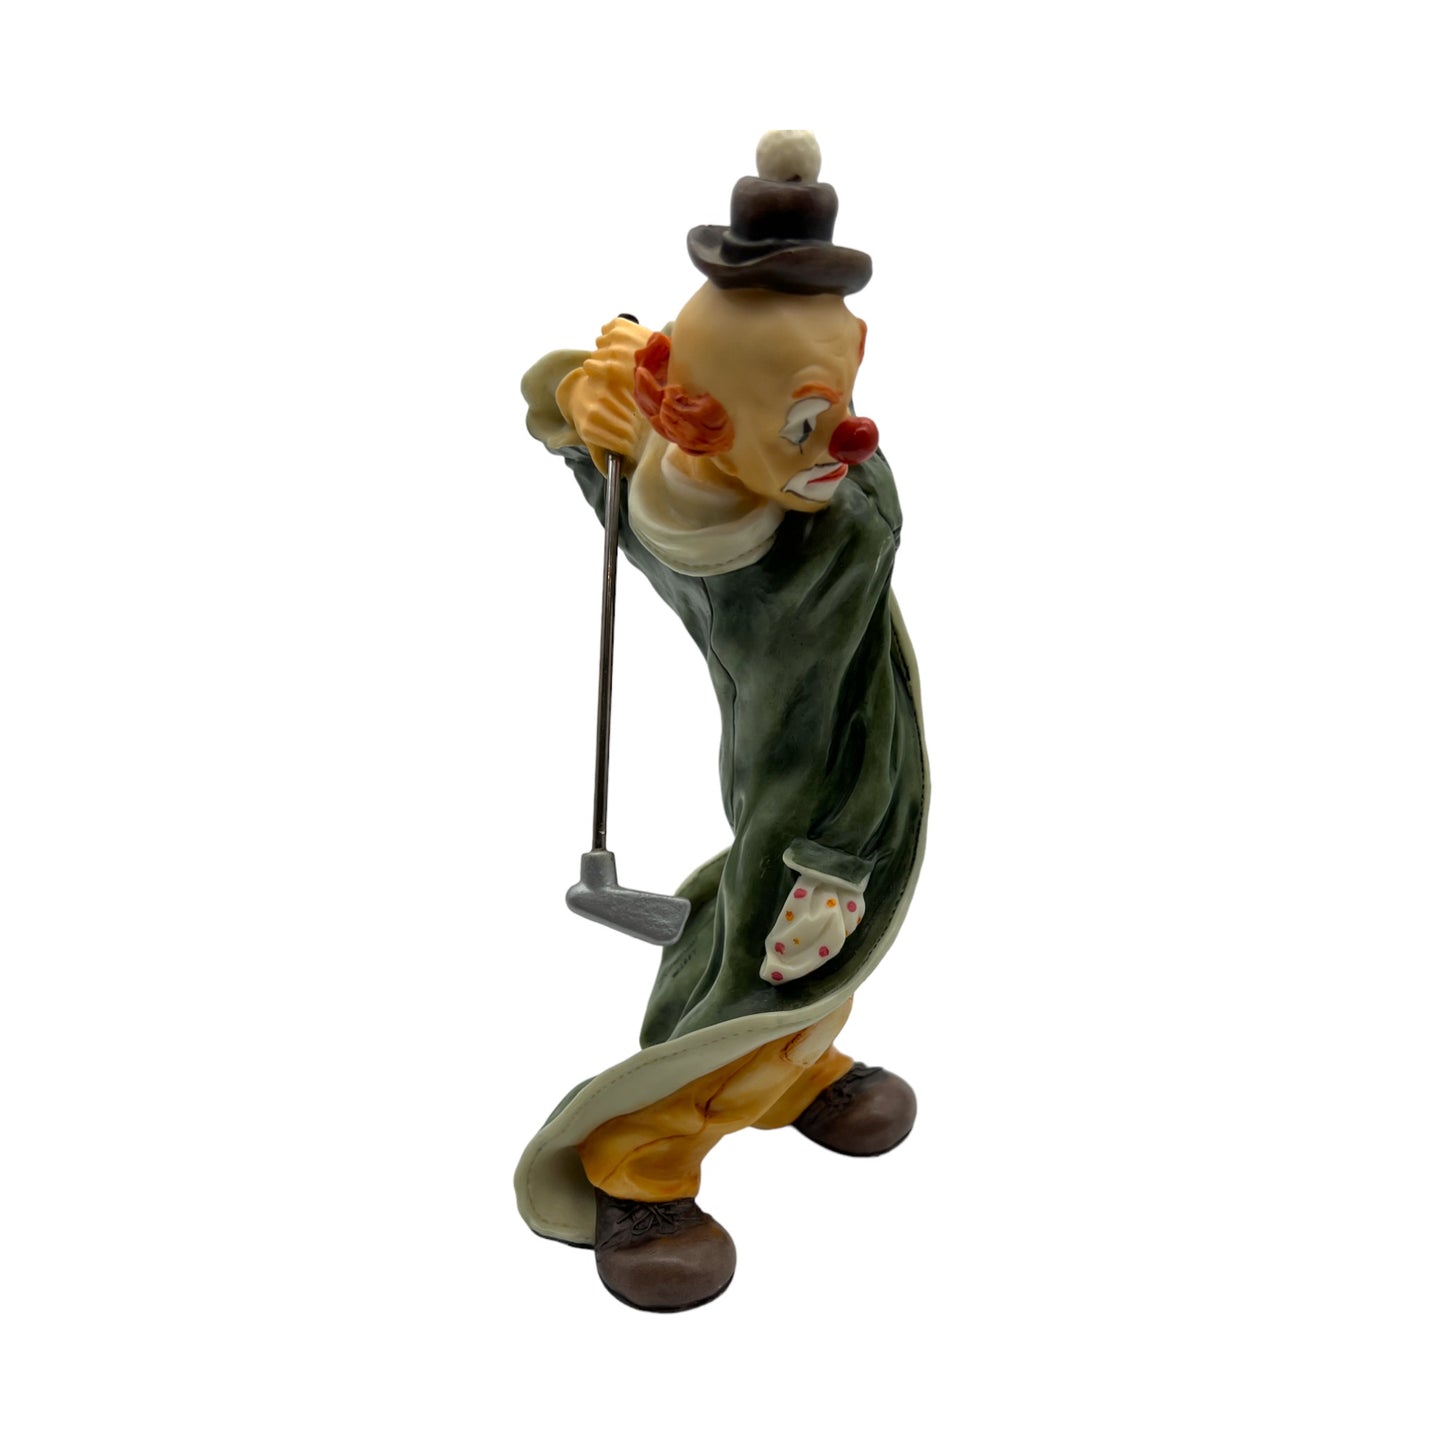 Summit Collection - Golfing Clown Swinging a Putter Figurine - 10"